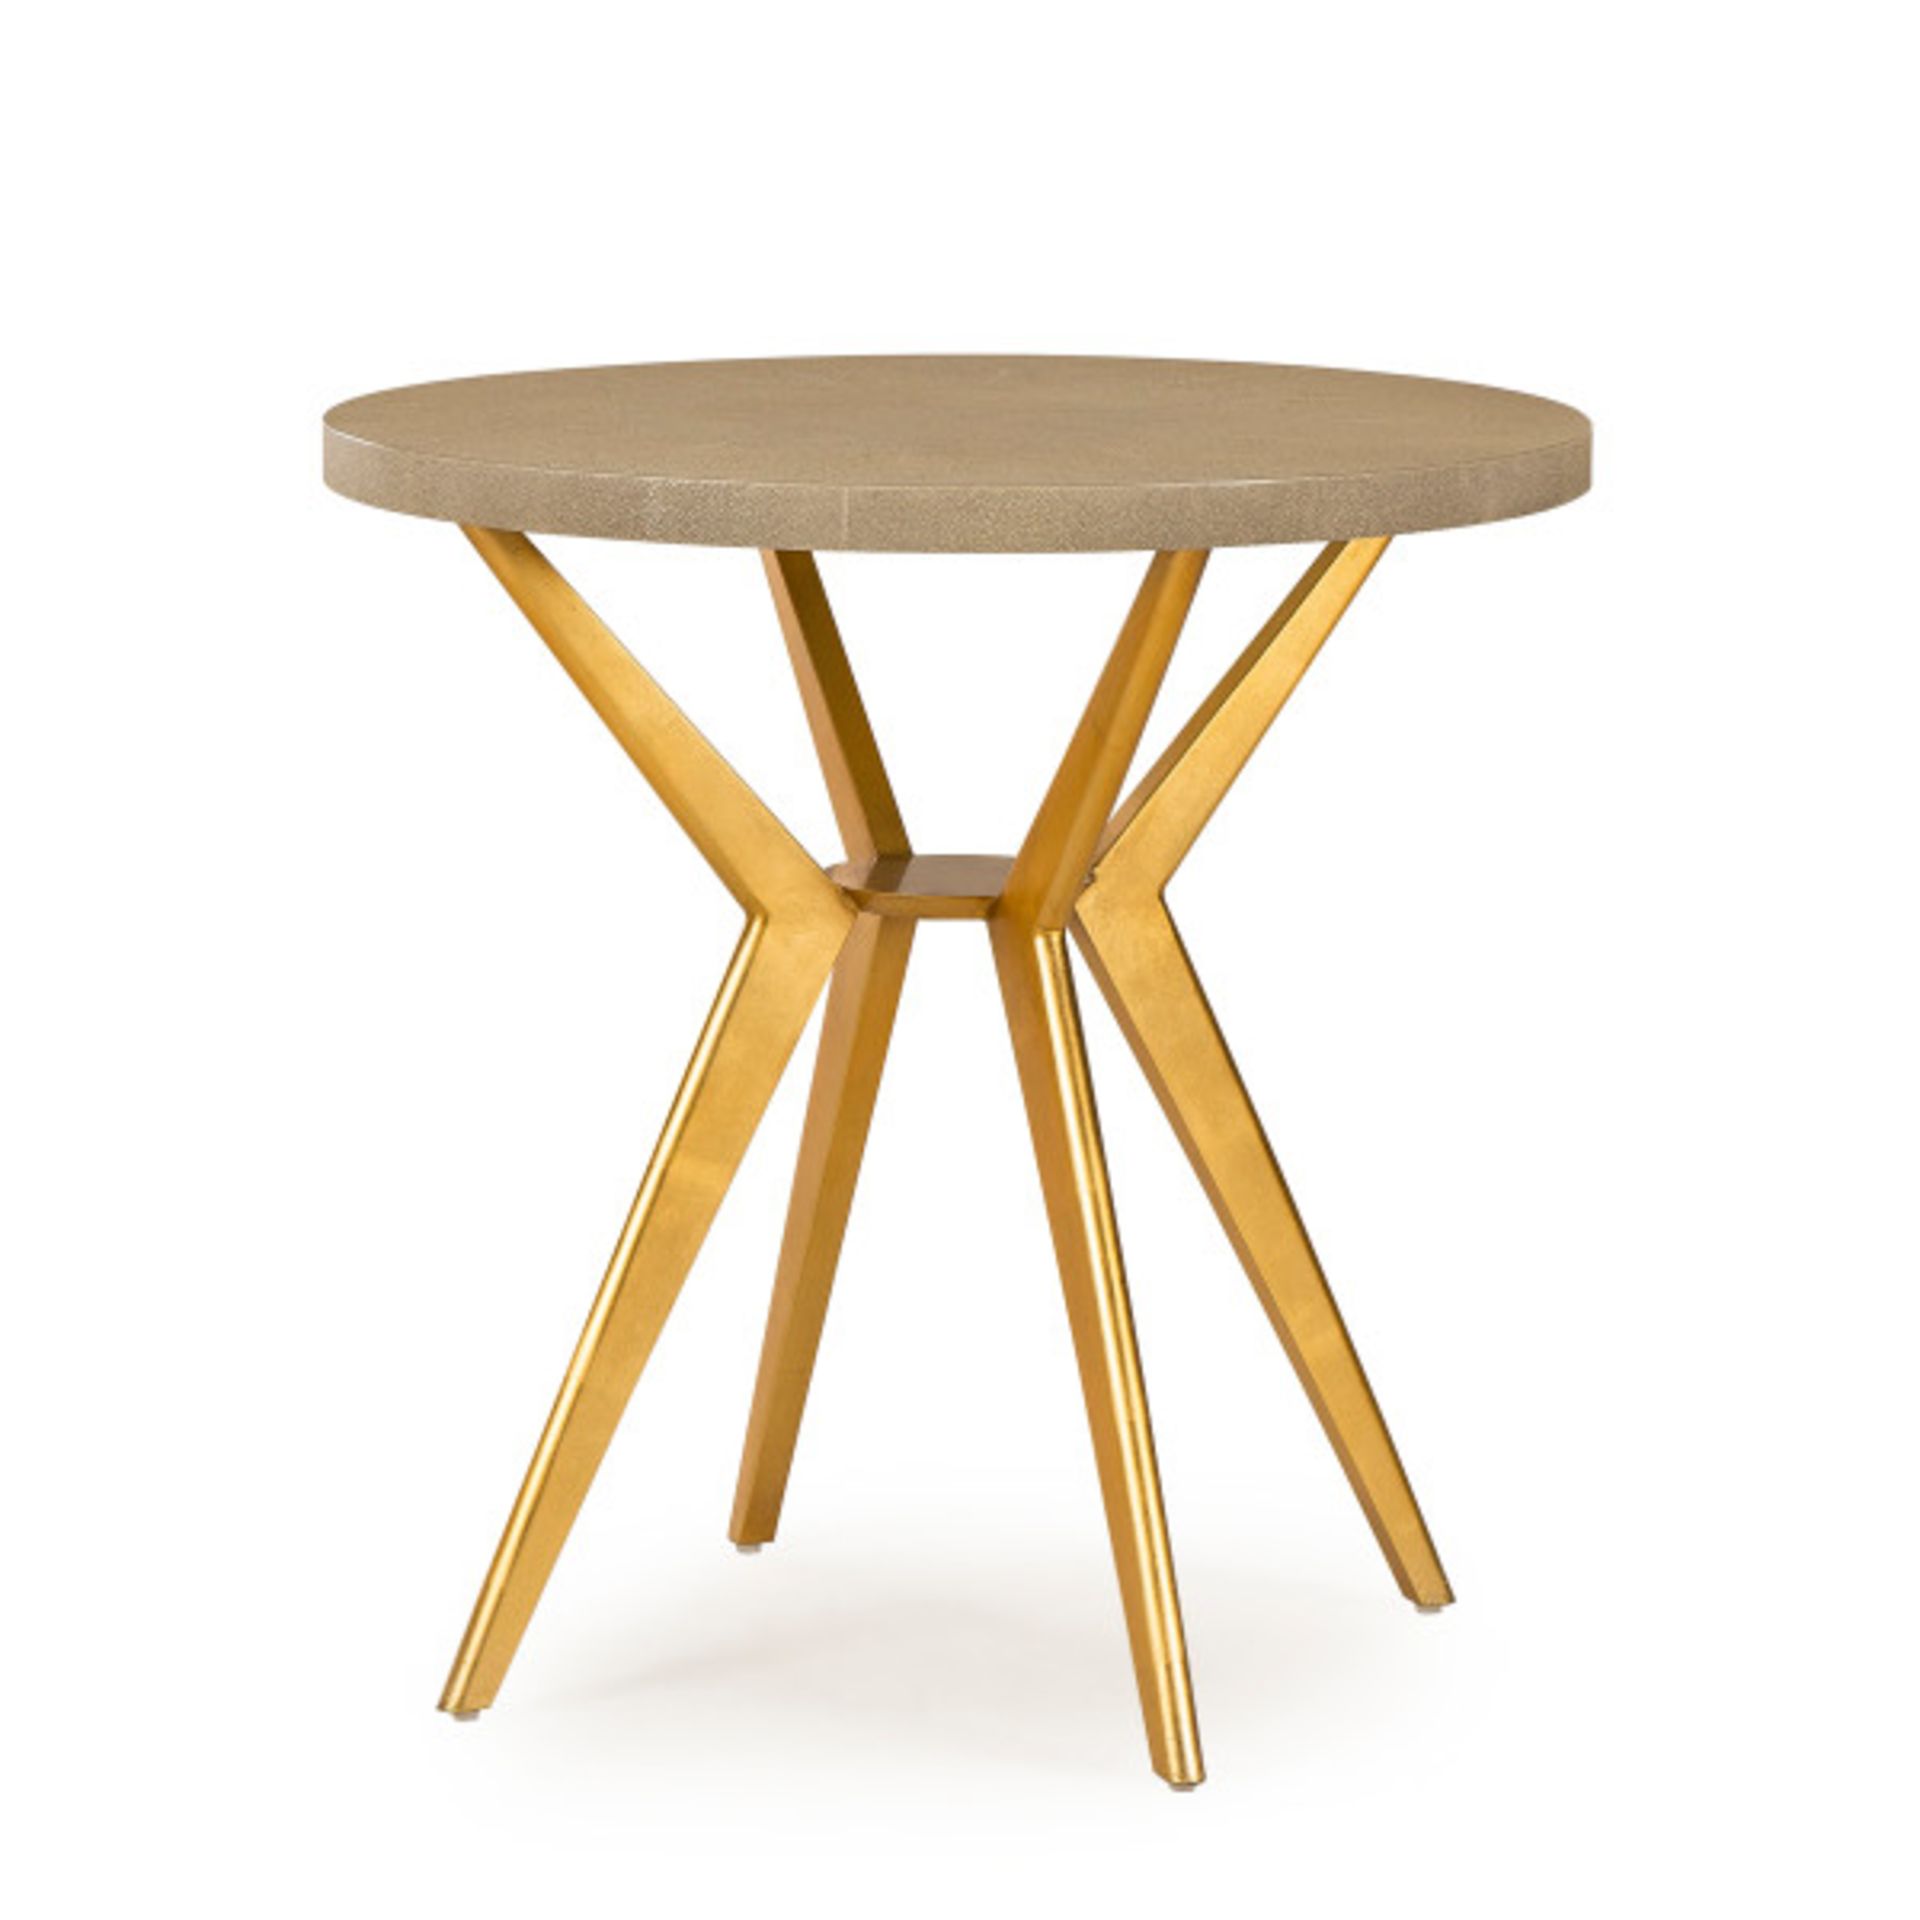 Hines Side Table - Round 76.2 x 76.2 x 76.2 CM -designs reflect the dynamic evolution of the modern